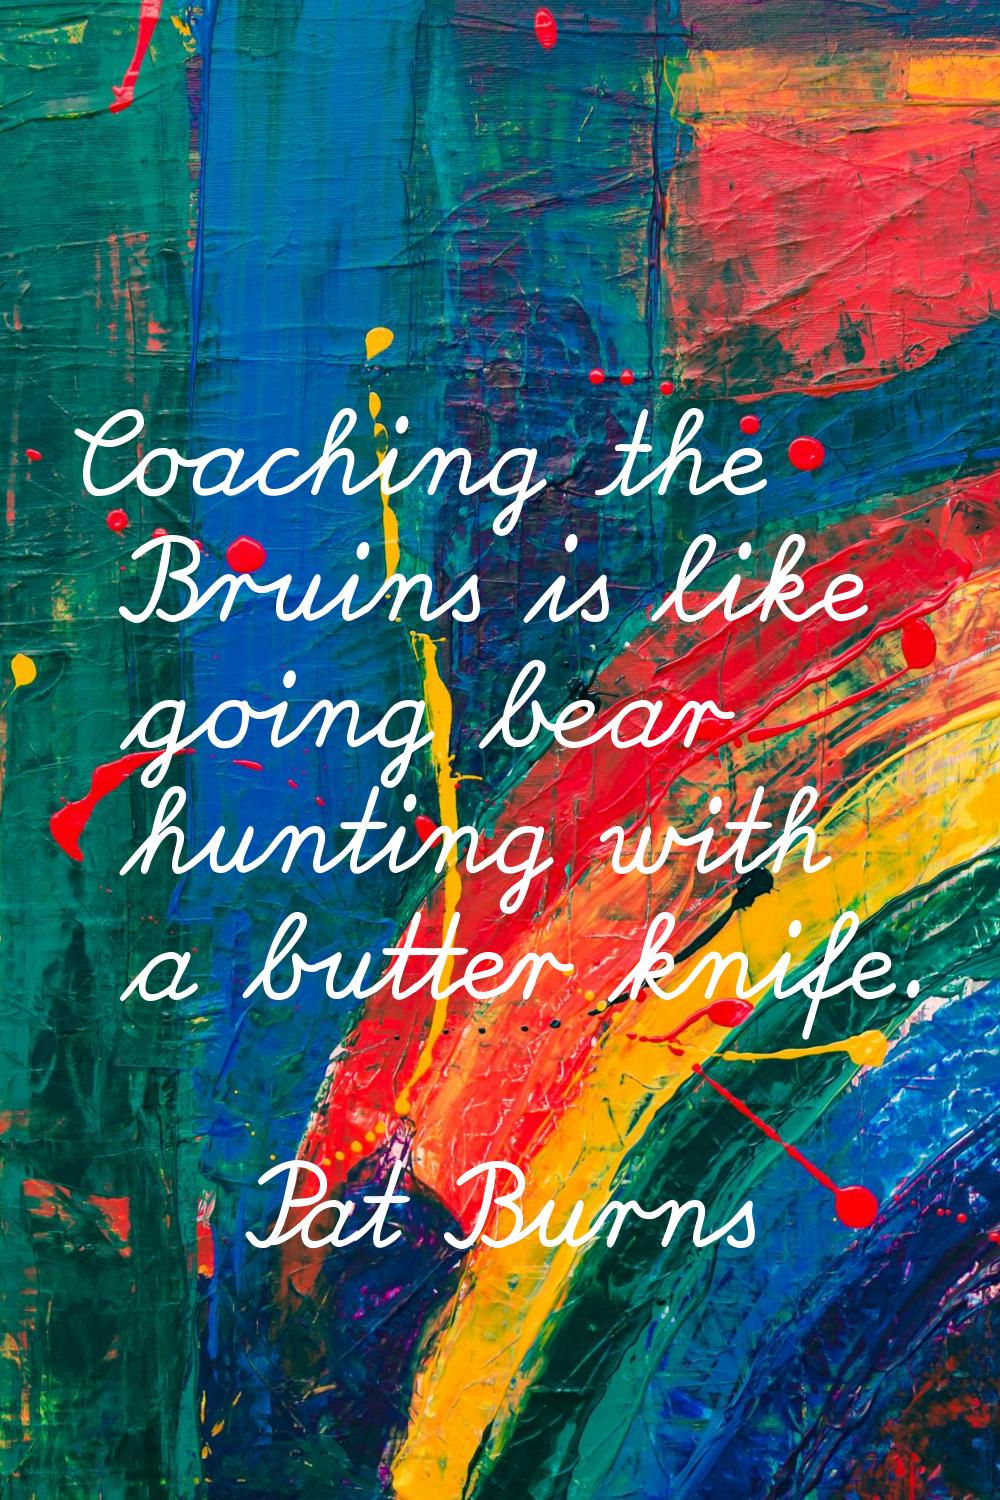 Coaching the Bruins is like going bear hunting with a butter knife.